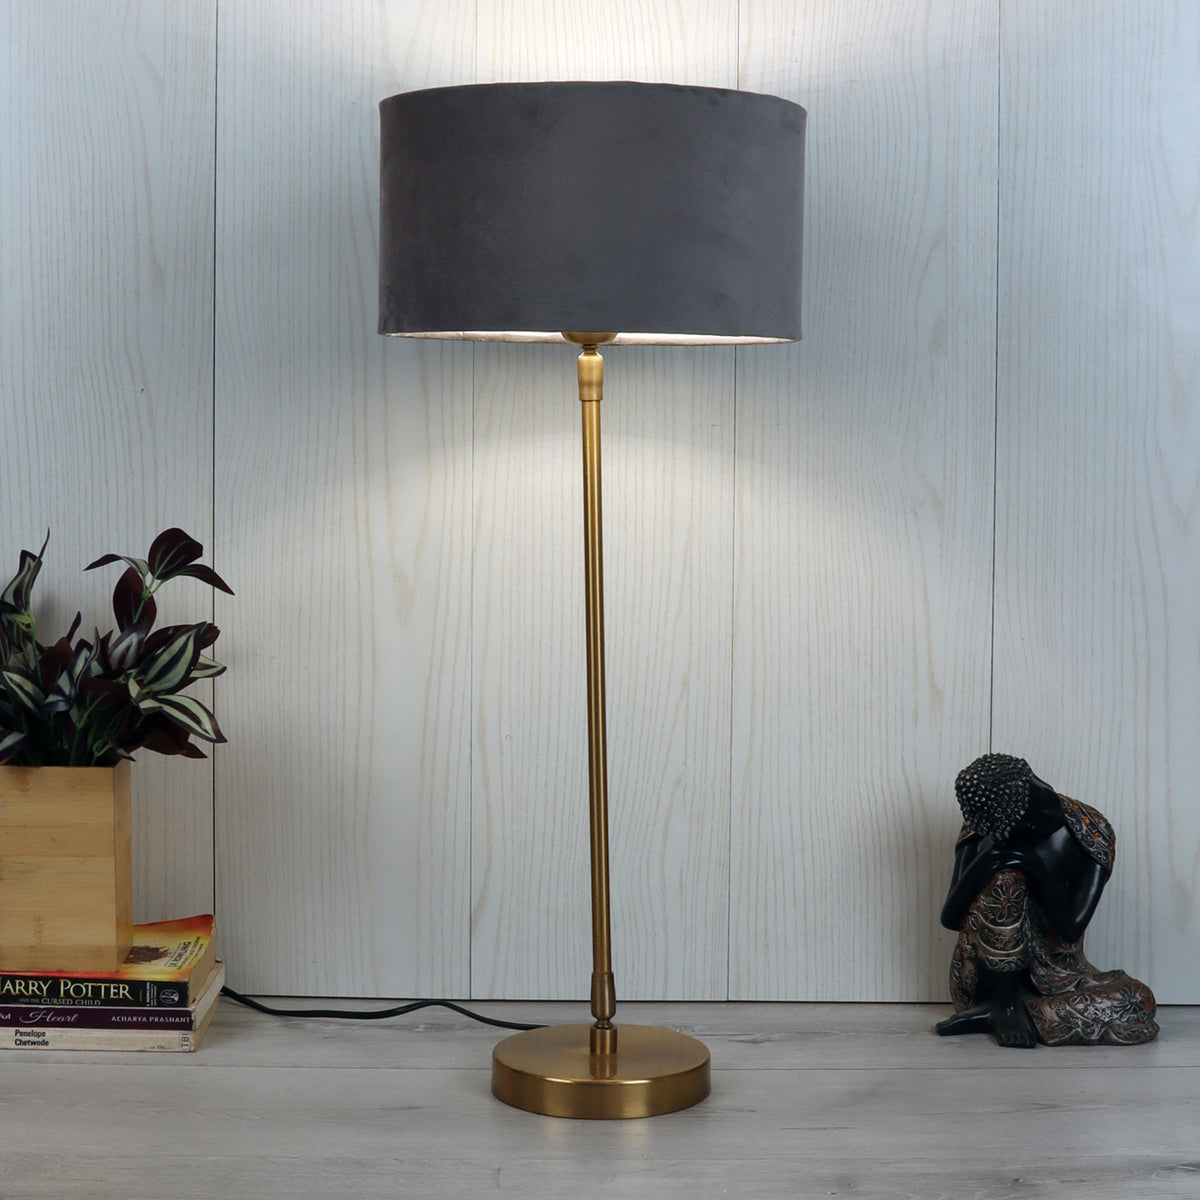 The "Large Gold MJ  Lamp" with Grey velvet shade